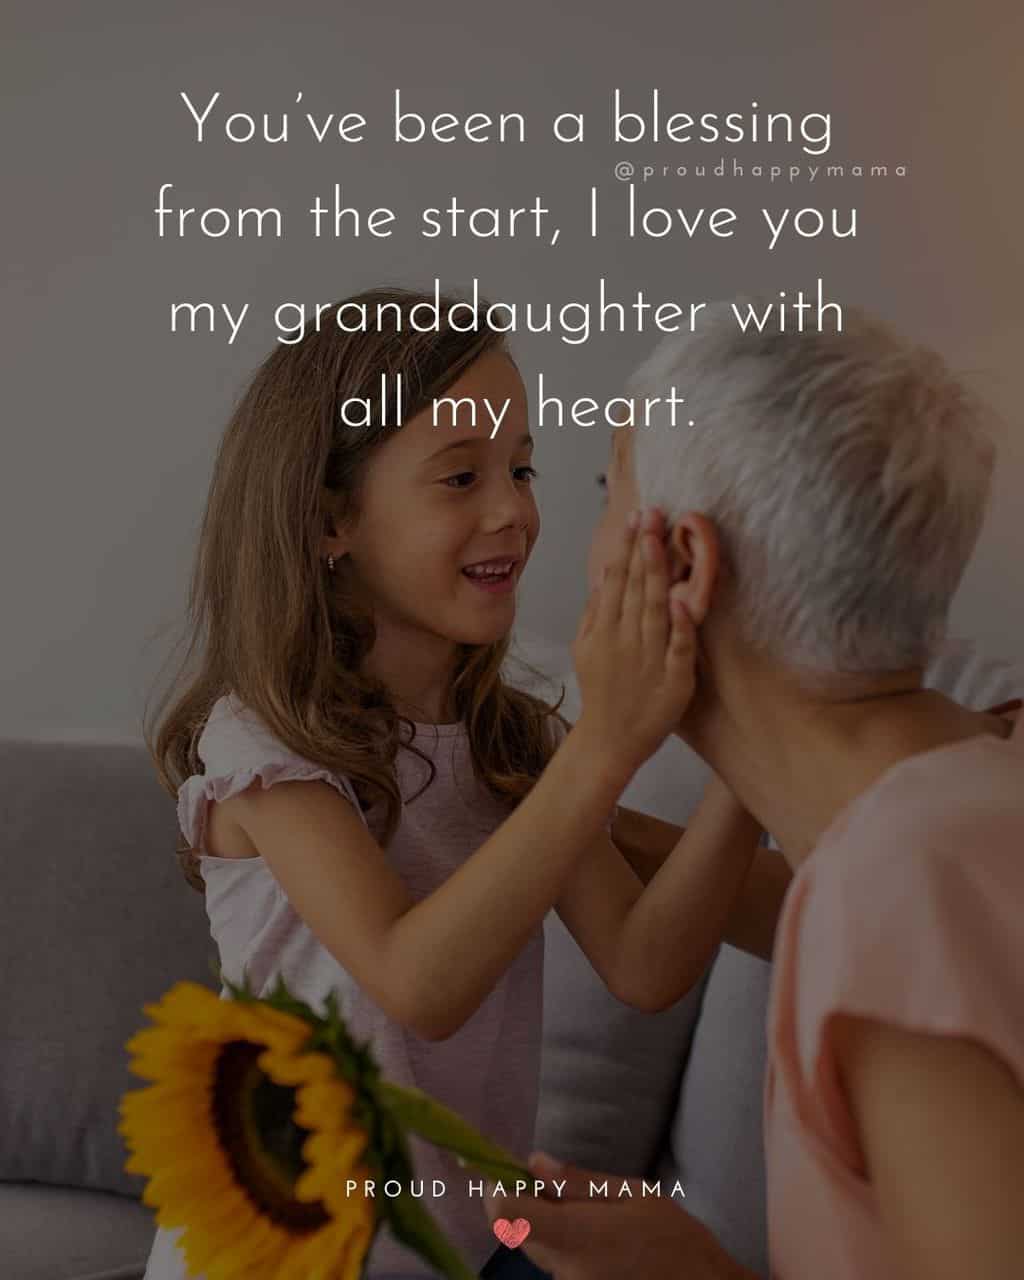 Granddaughter Quotes - You’ve been a blessing from the start, I love you my granddaughter with all my heart.’